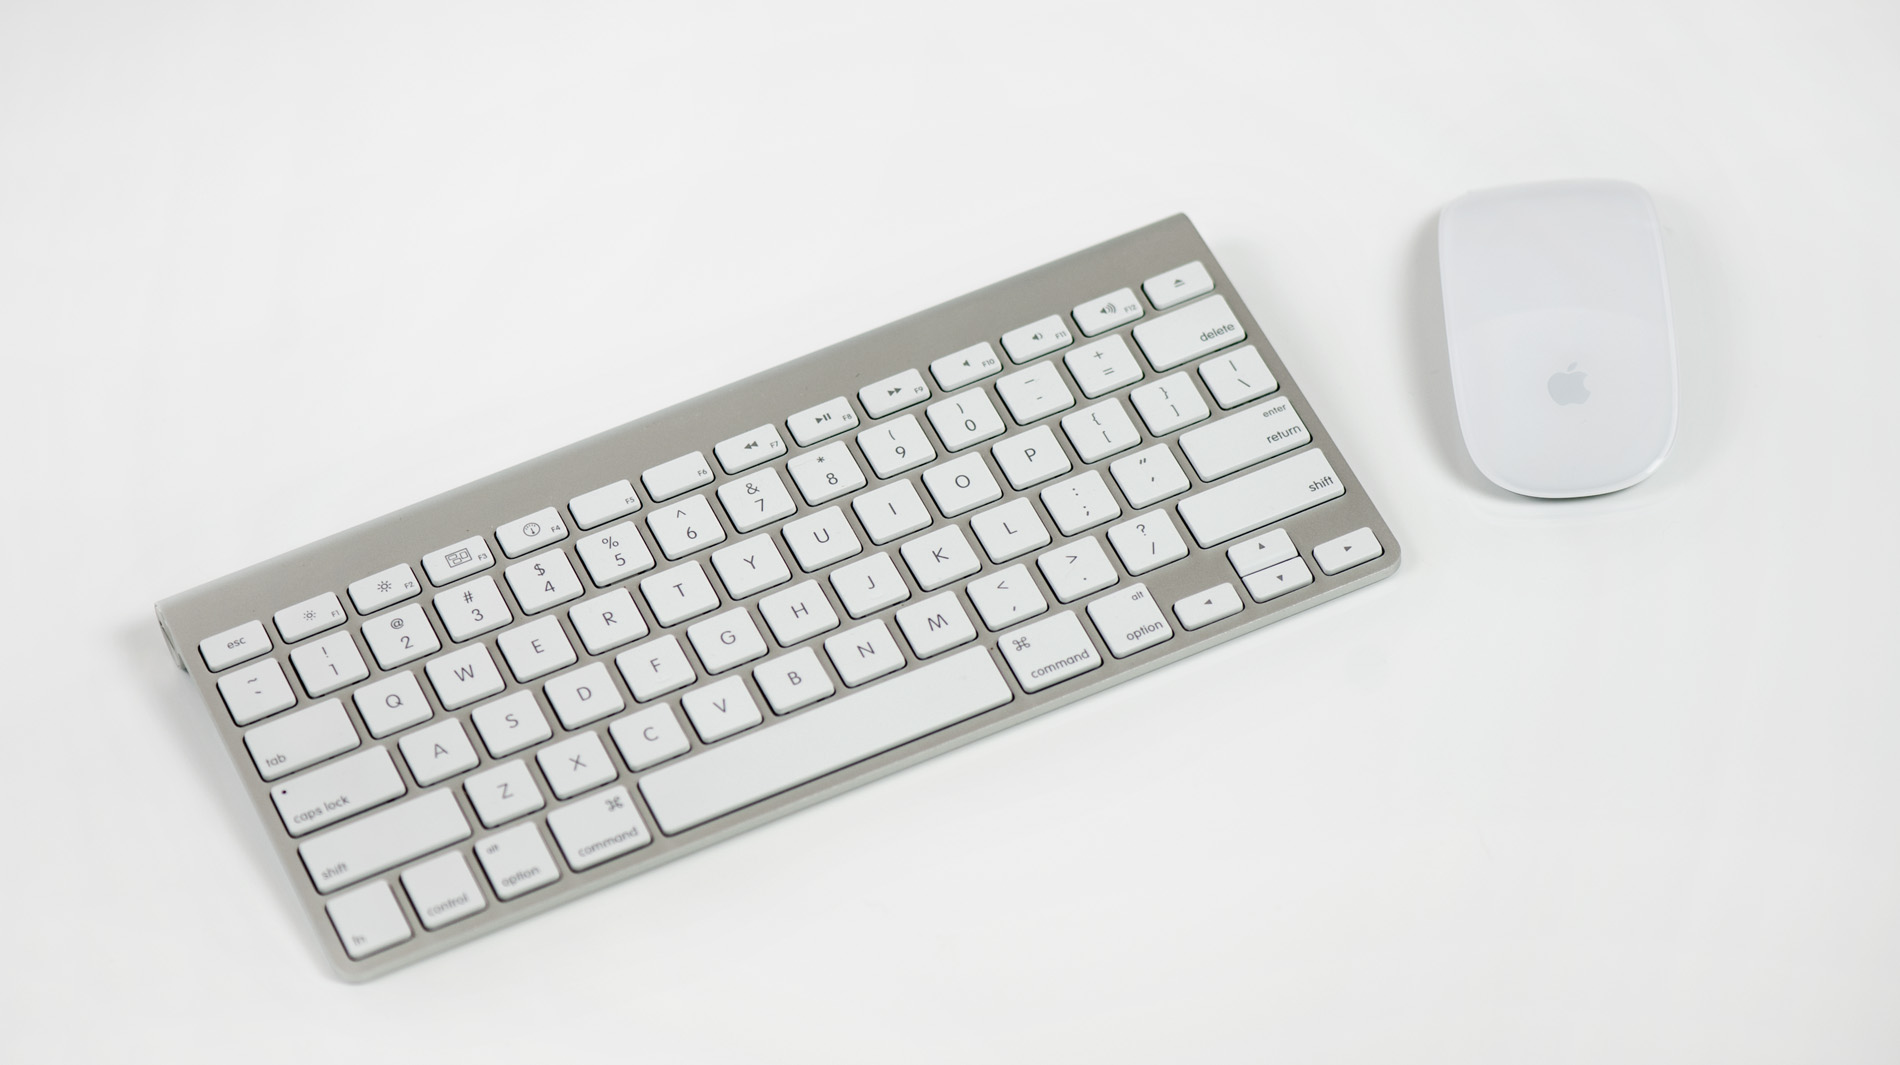 Wireless MINI Mouse and Keyboard Boxed Set for 2011 I Mac IMac GD HS 